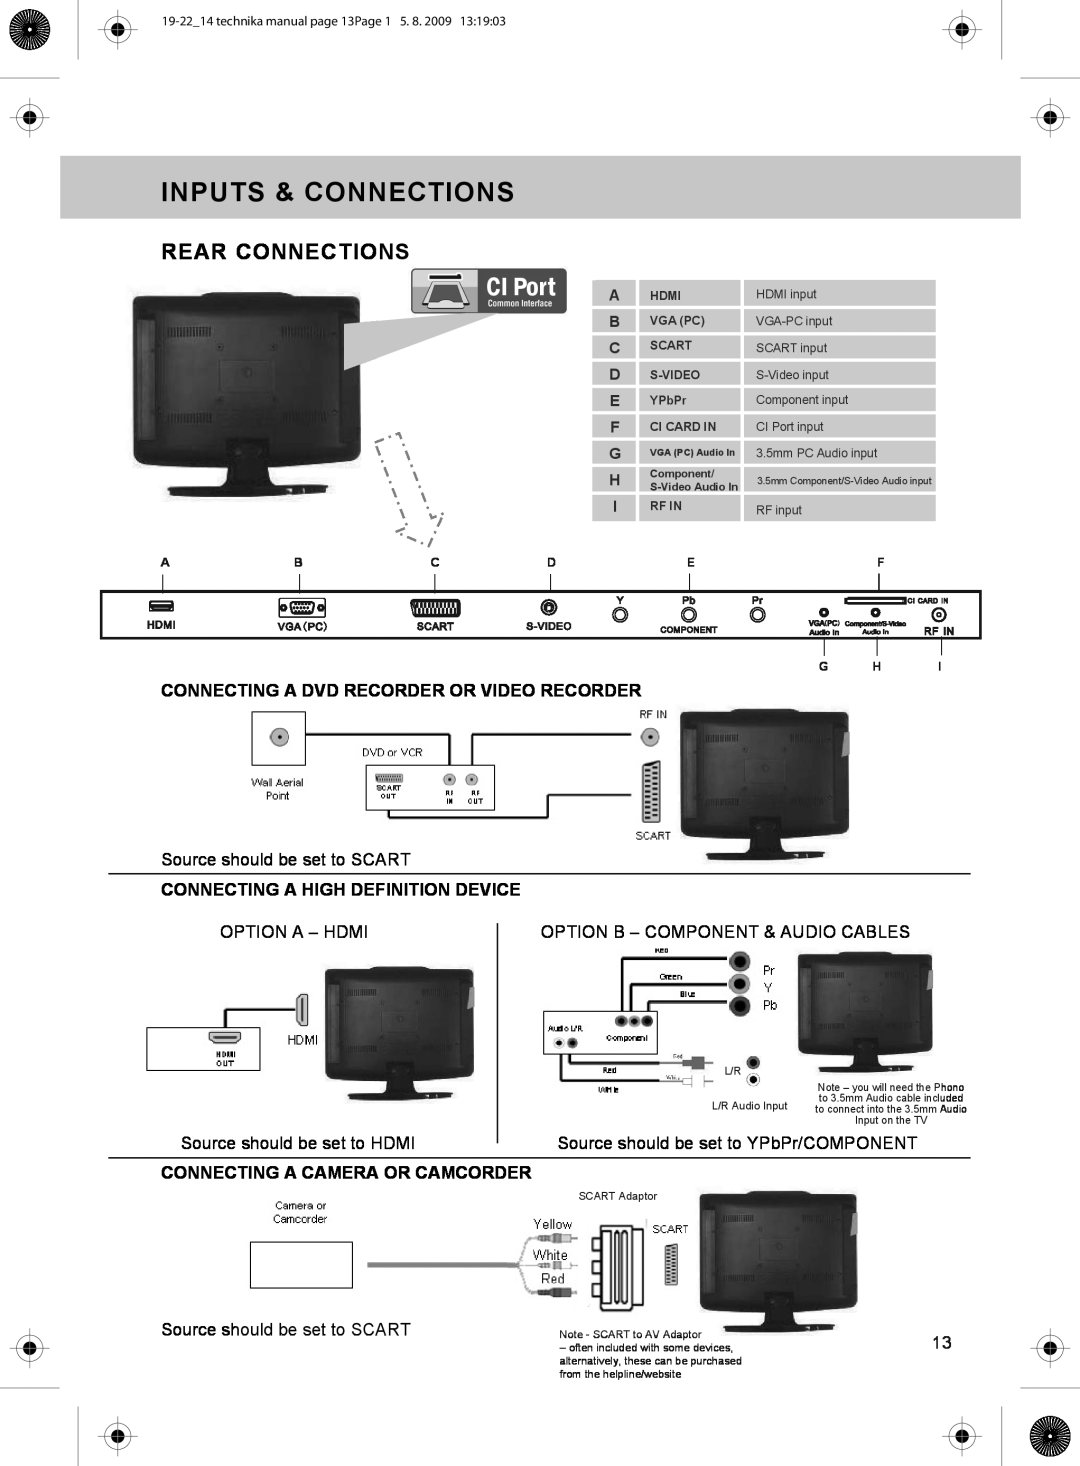 Technika 19-208, 22-208 Inputs & Connections, Rear Connections, CI Port, Connecting A Dvd Recorder Or Video Recorder, Abcd 